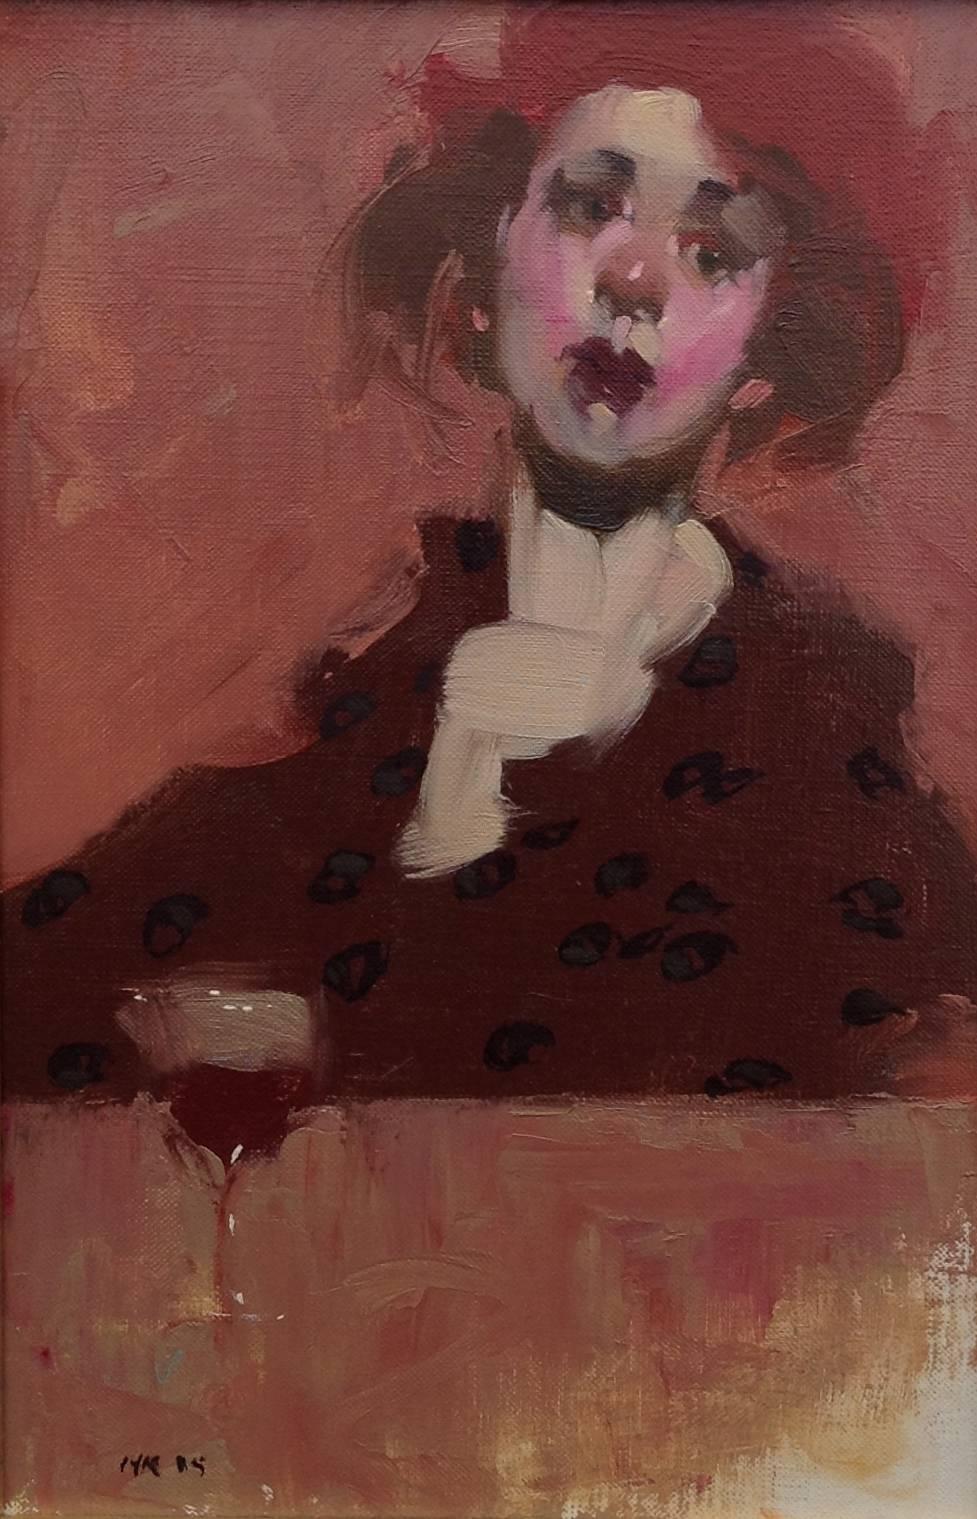 Milt Kobayashi Figurative Painting - "Red Hat" portrait oil painting of a woman in a red hat with red wine